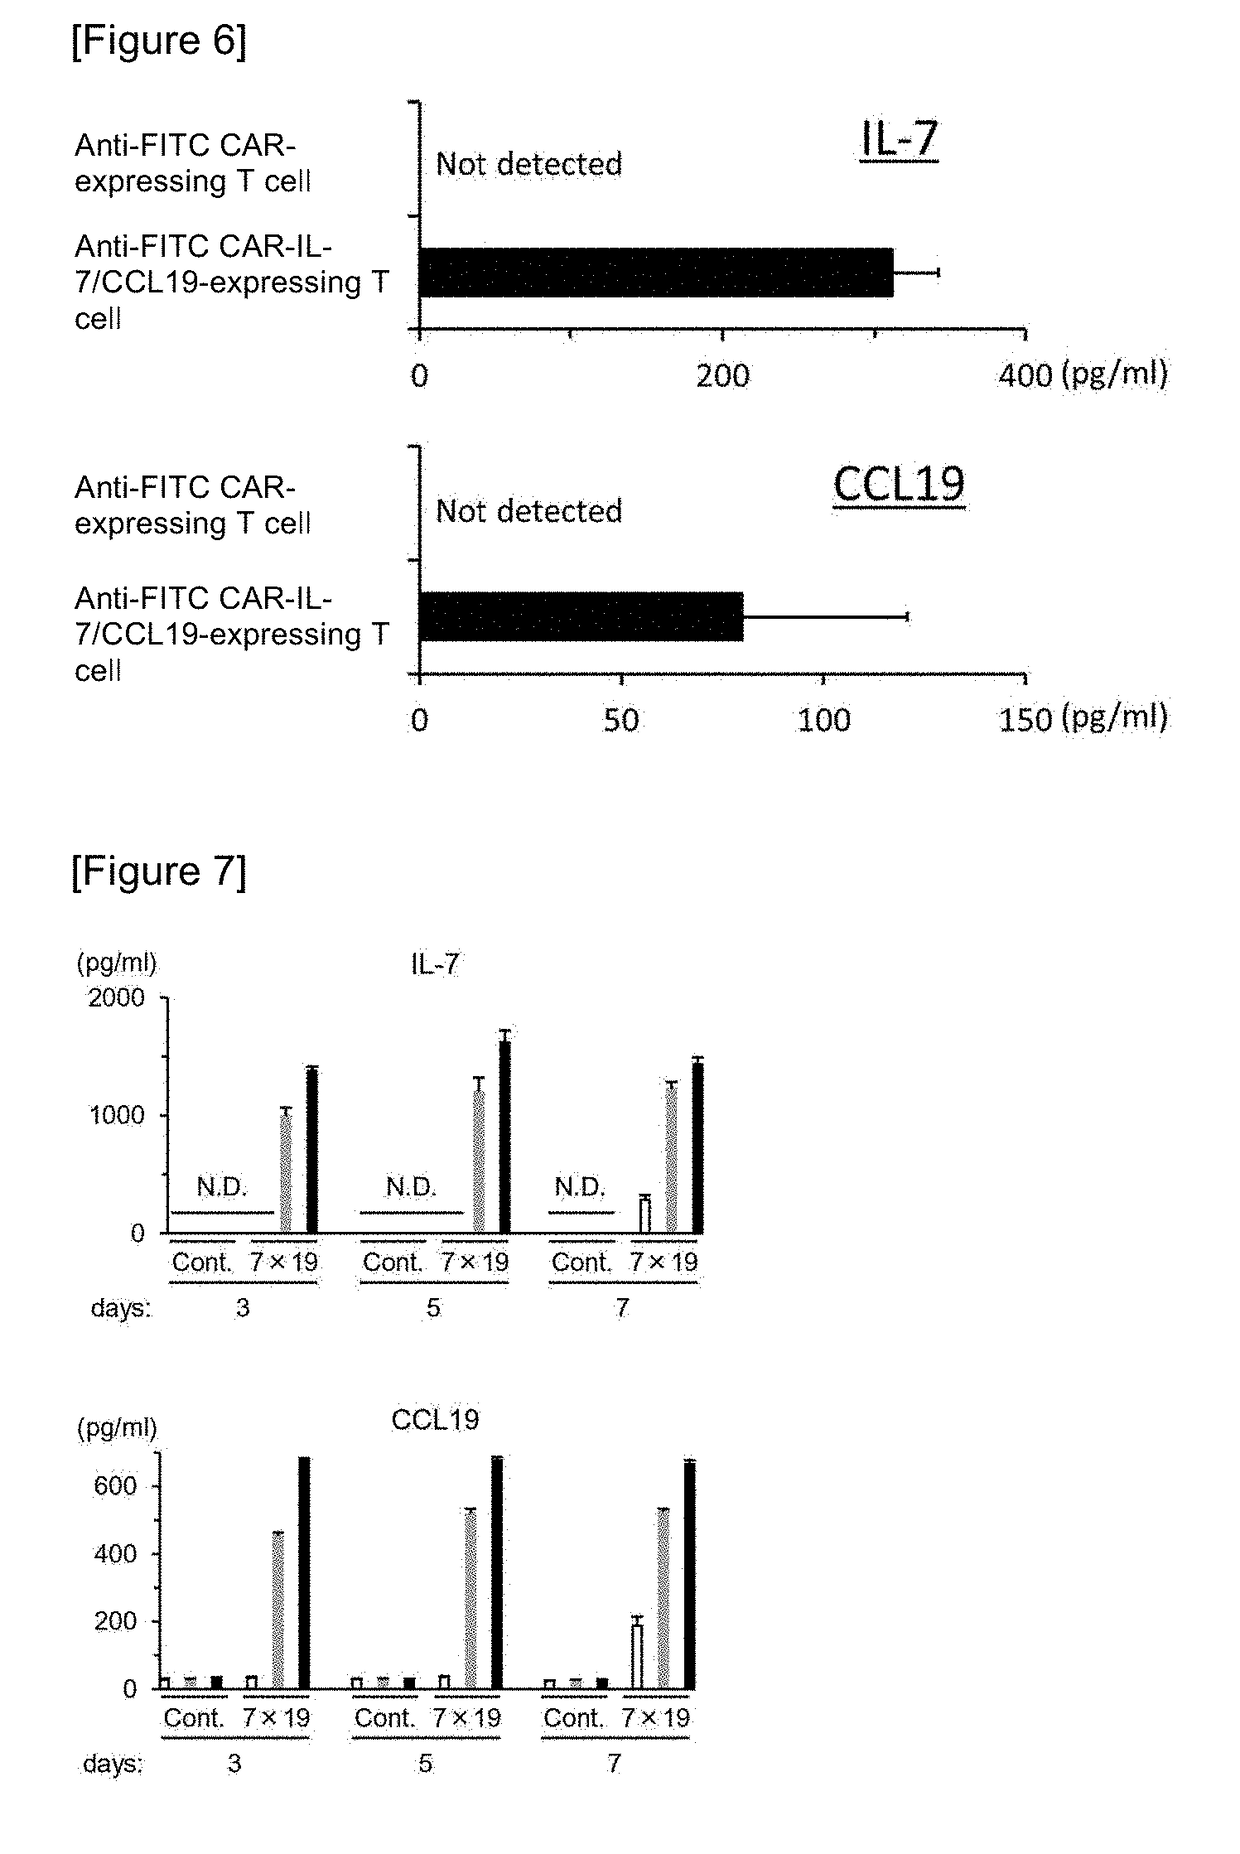 Car expression vector and car-expressing t cells